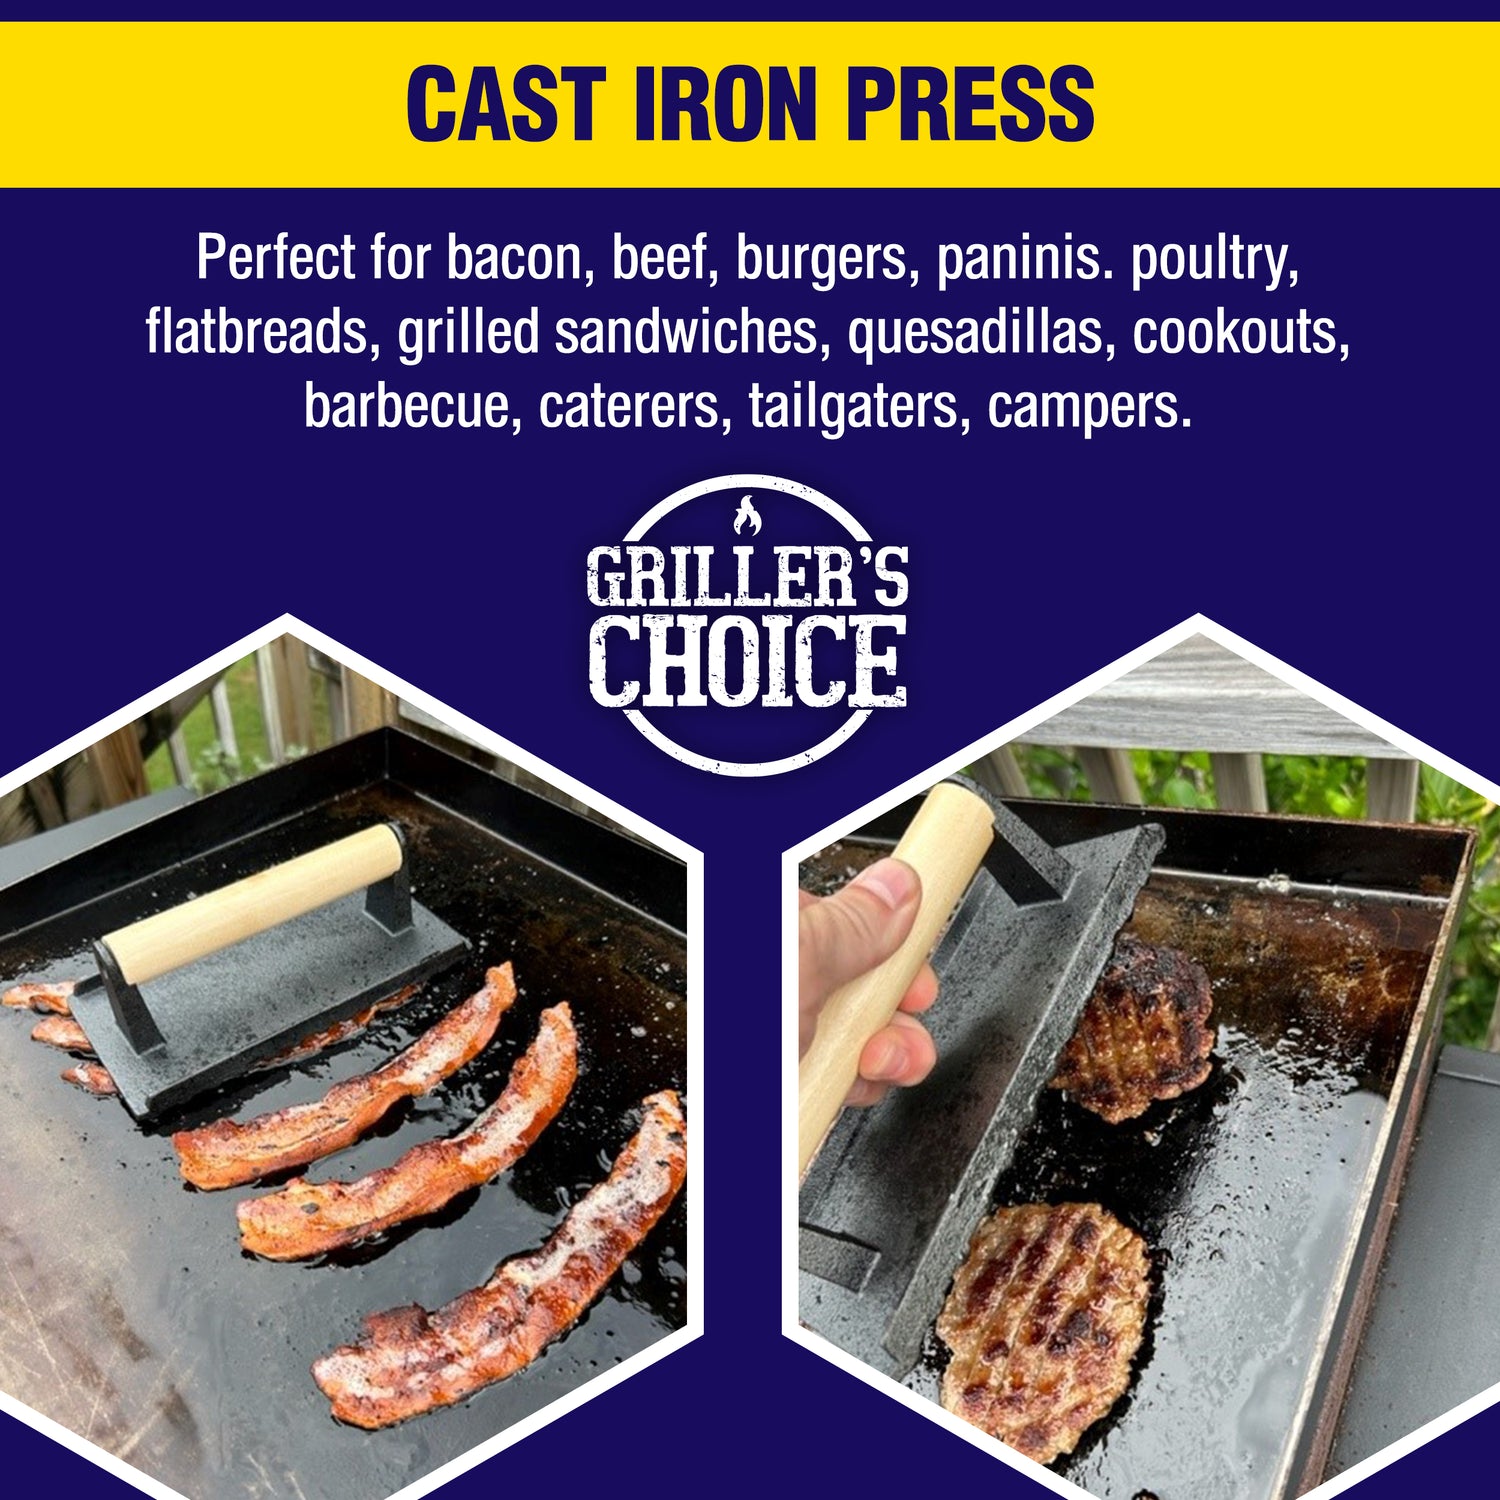 9 Best Grill Presses for Smash Burgers, Bacon & Paninis